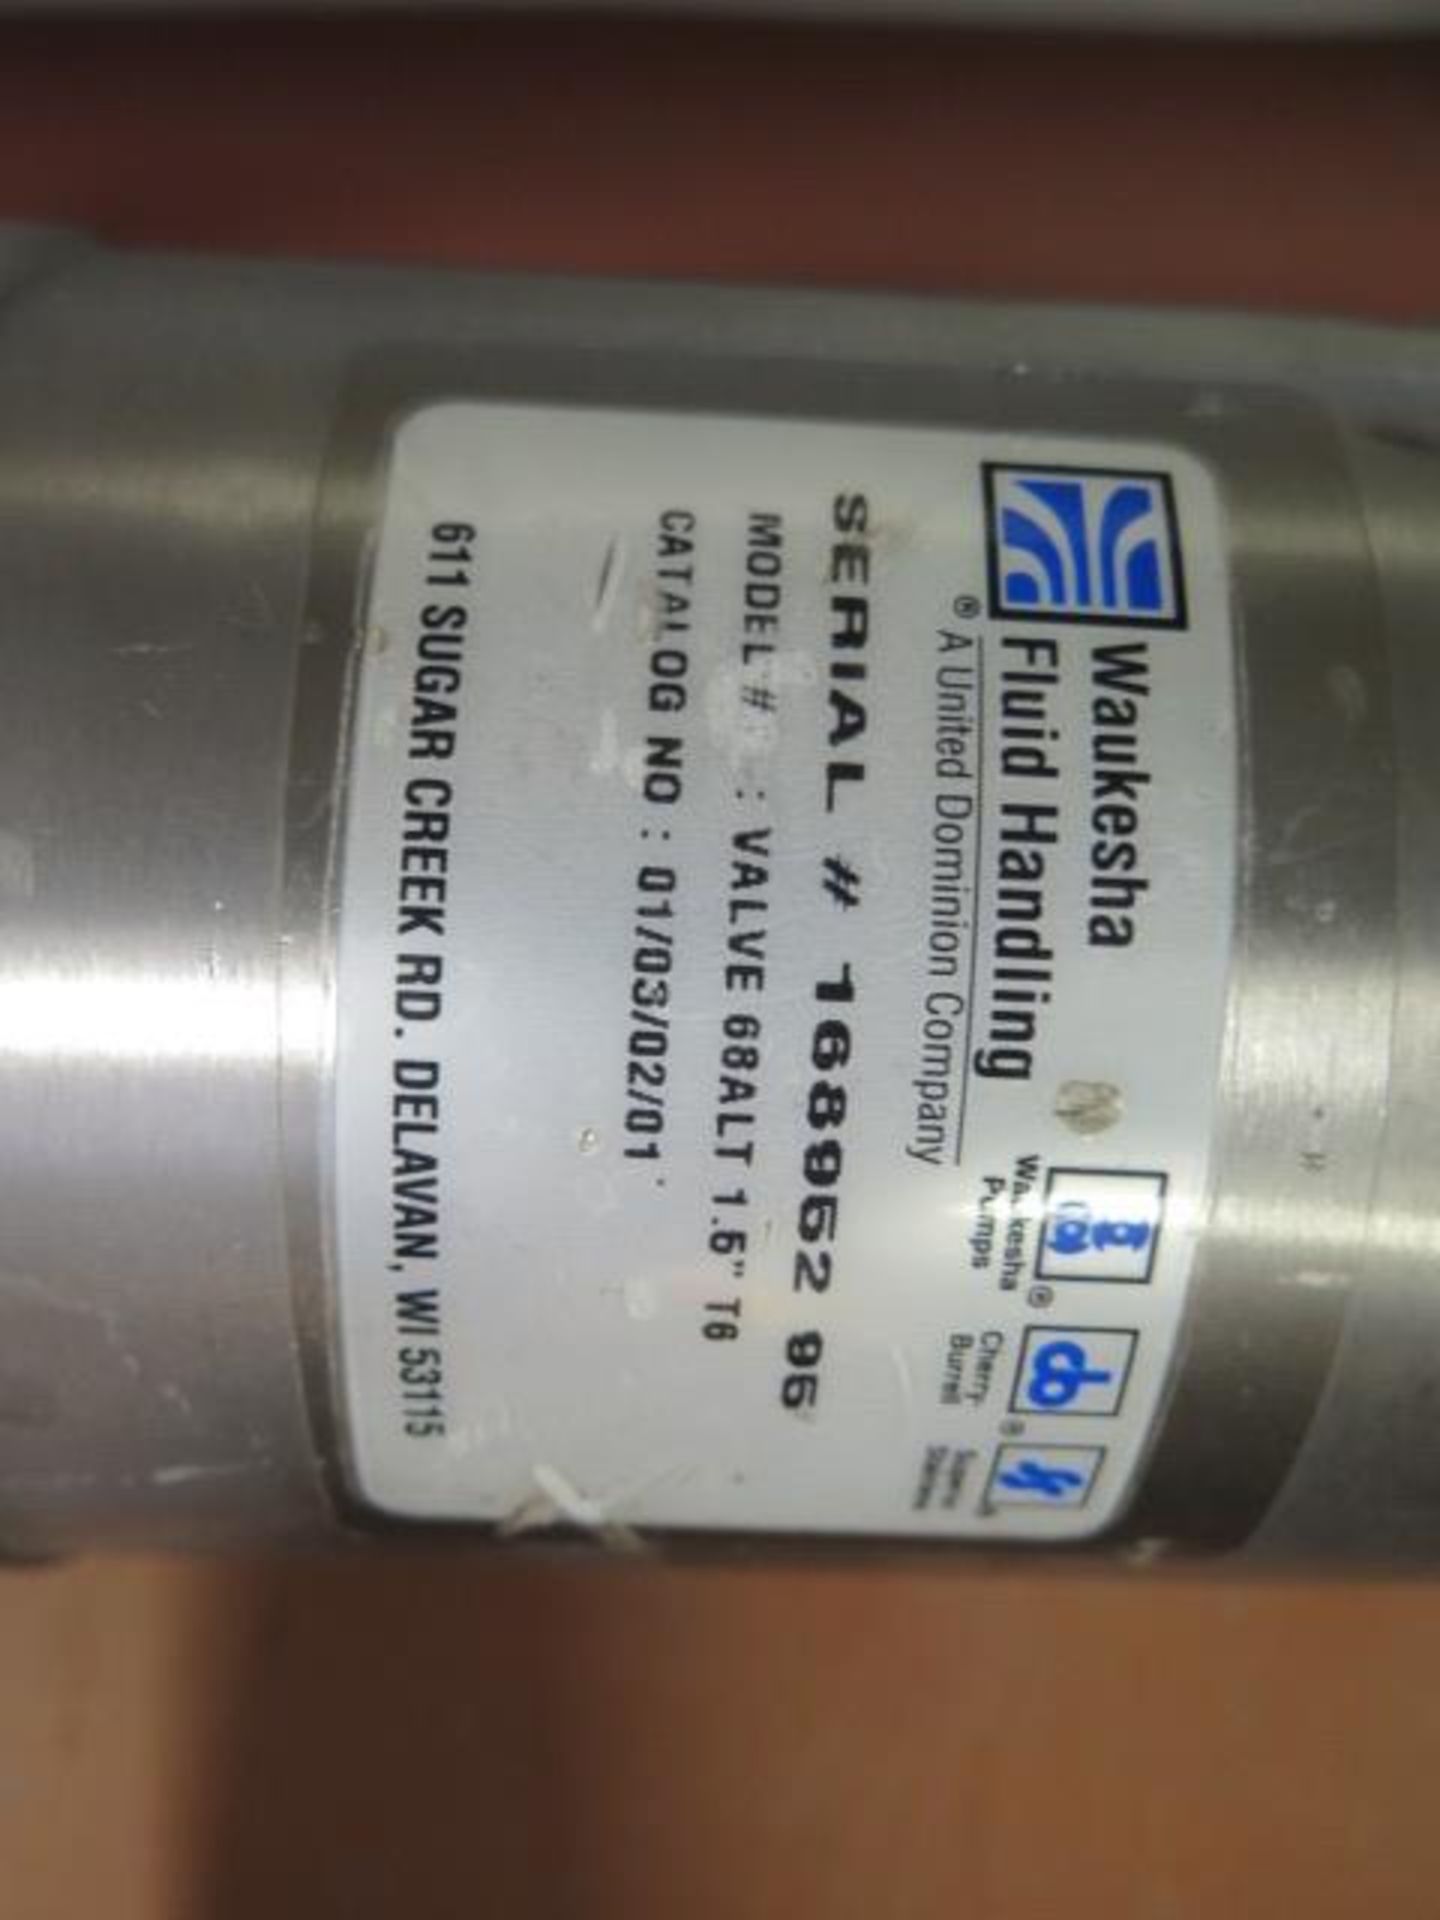 Waukesha Valve 68ALT 1.5" T6 Stainless Steel Valve (SOLD AS-IS - NO WARRANTY) - Image 6 of 6